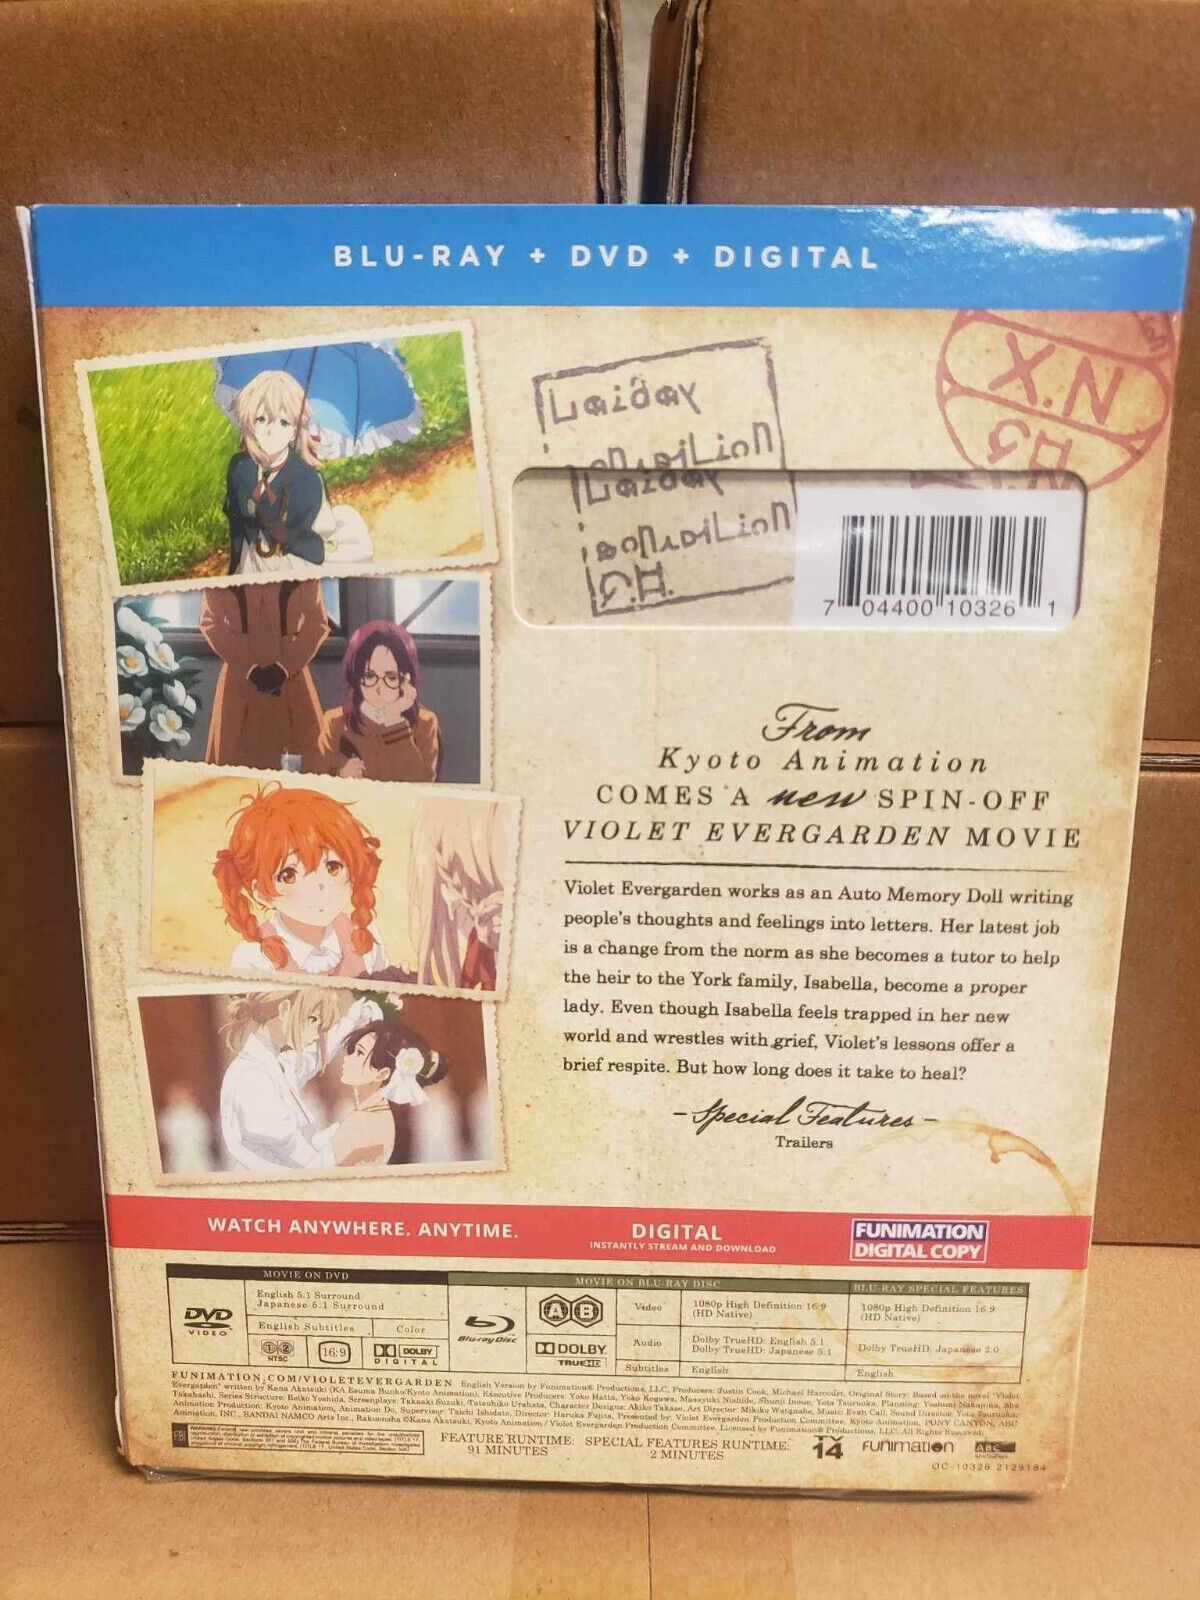 Violet Evergarden: Eternity and the Auto Memory Doll (Blu-ray/DVD, Digital) NEW